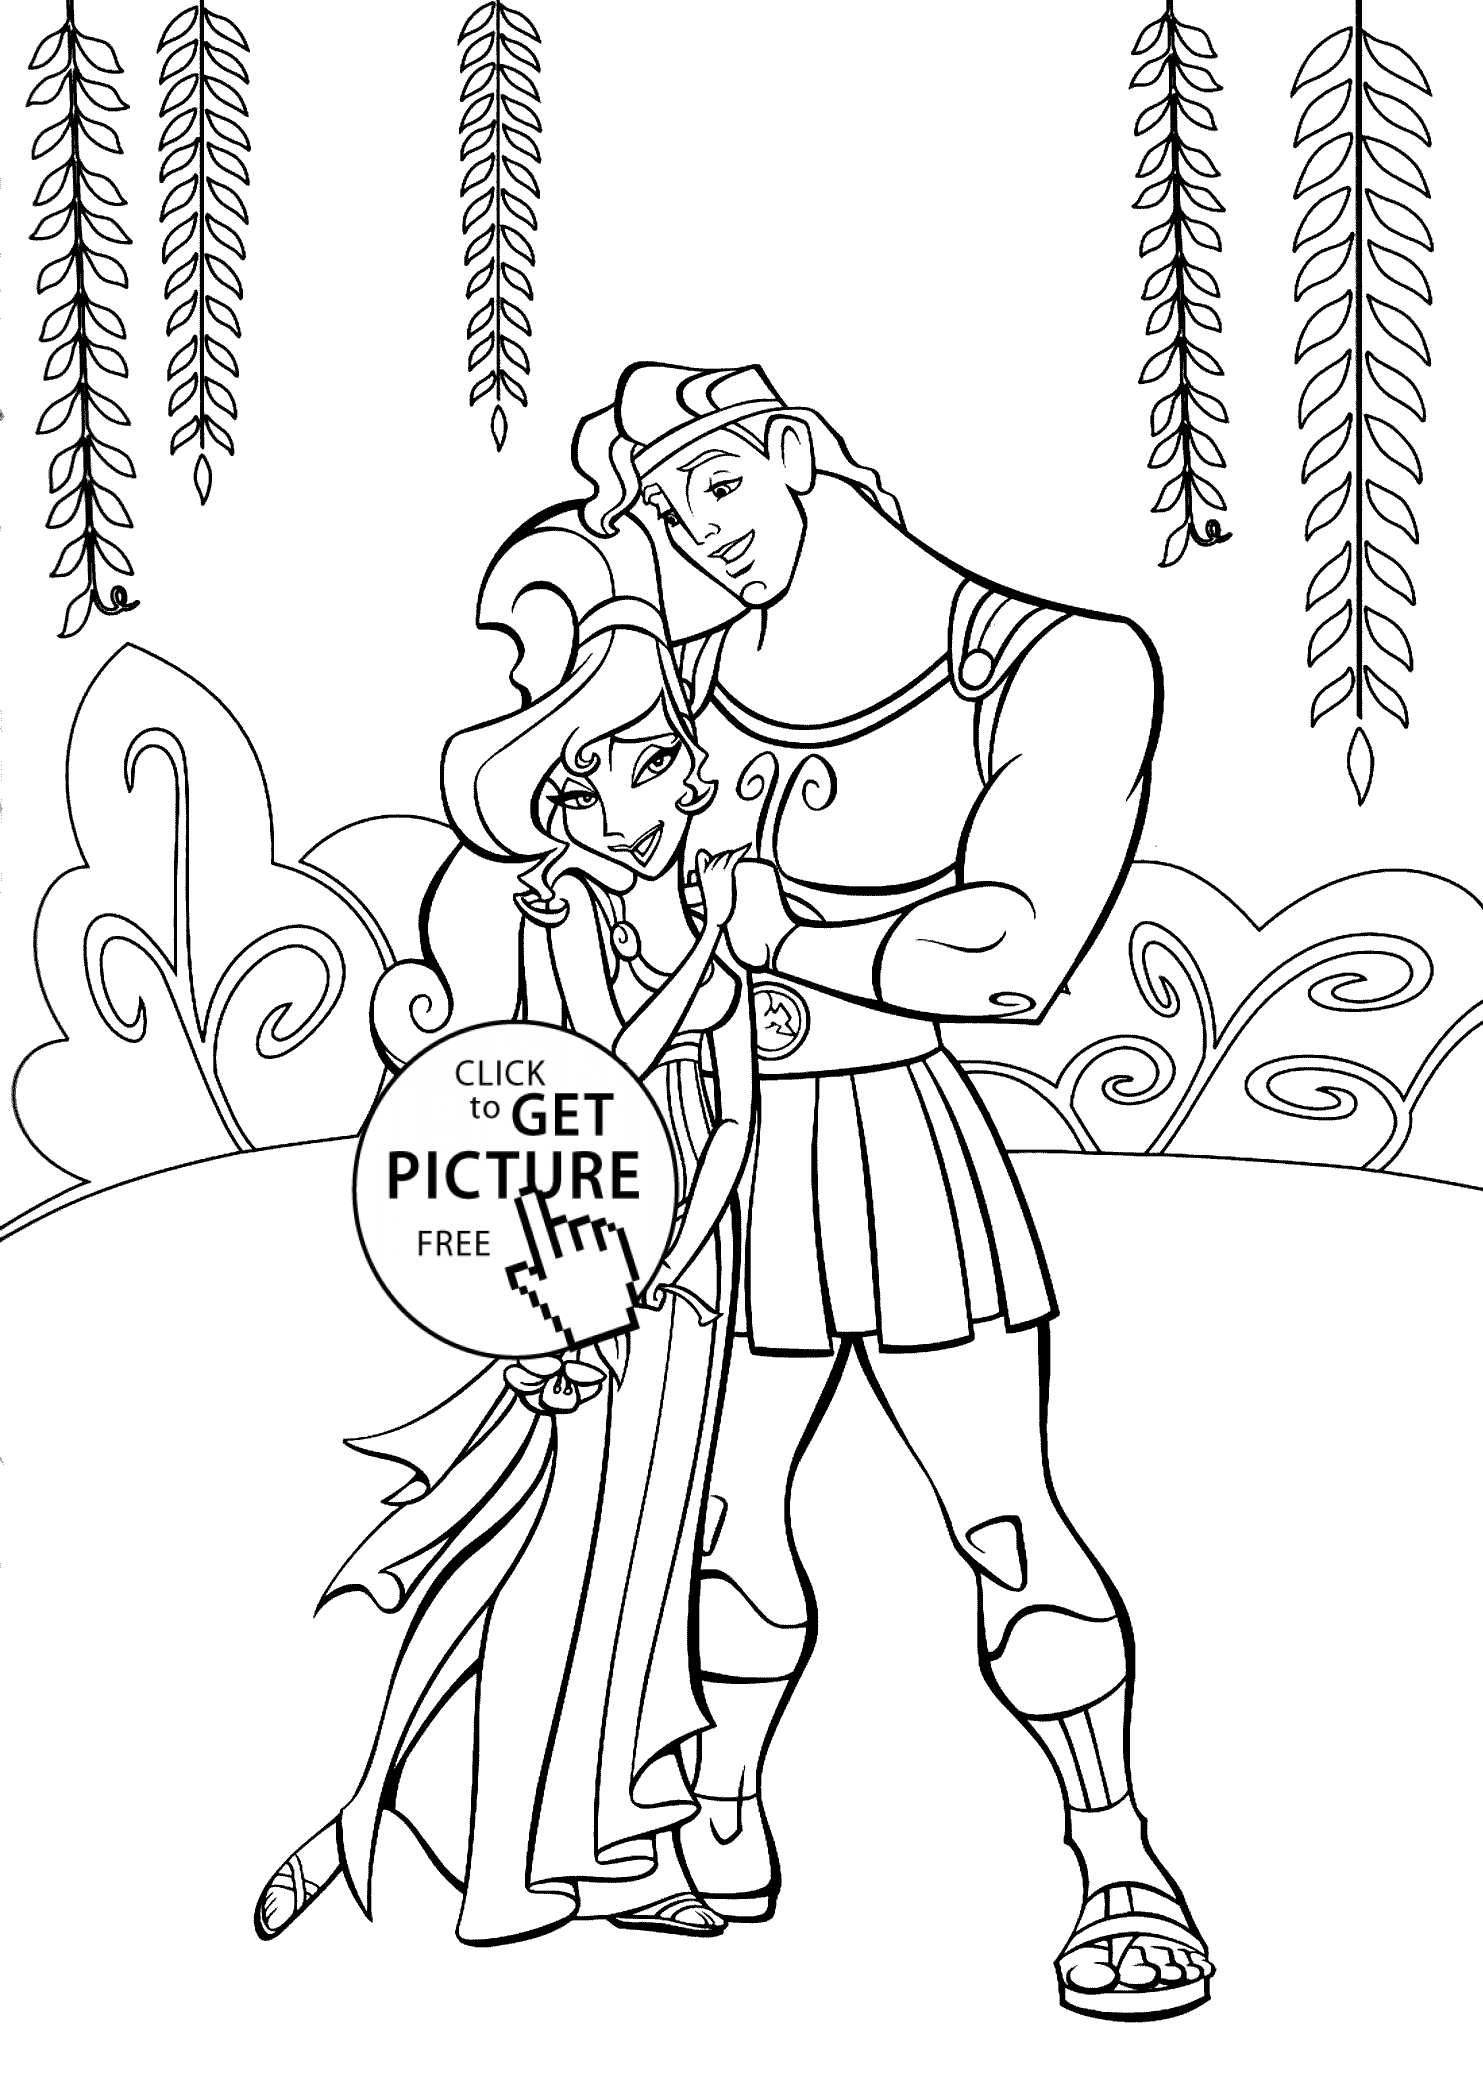 Hercules coloring pages for kids, printable free